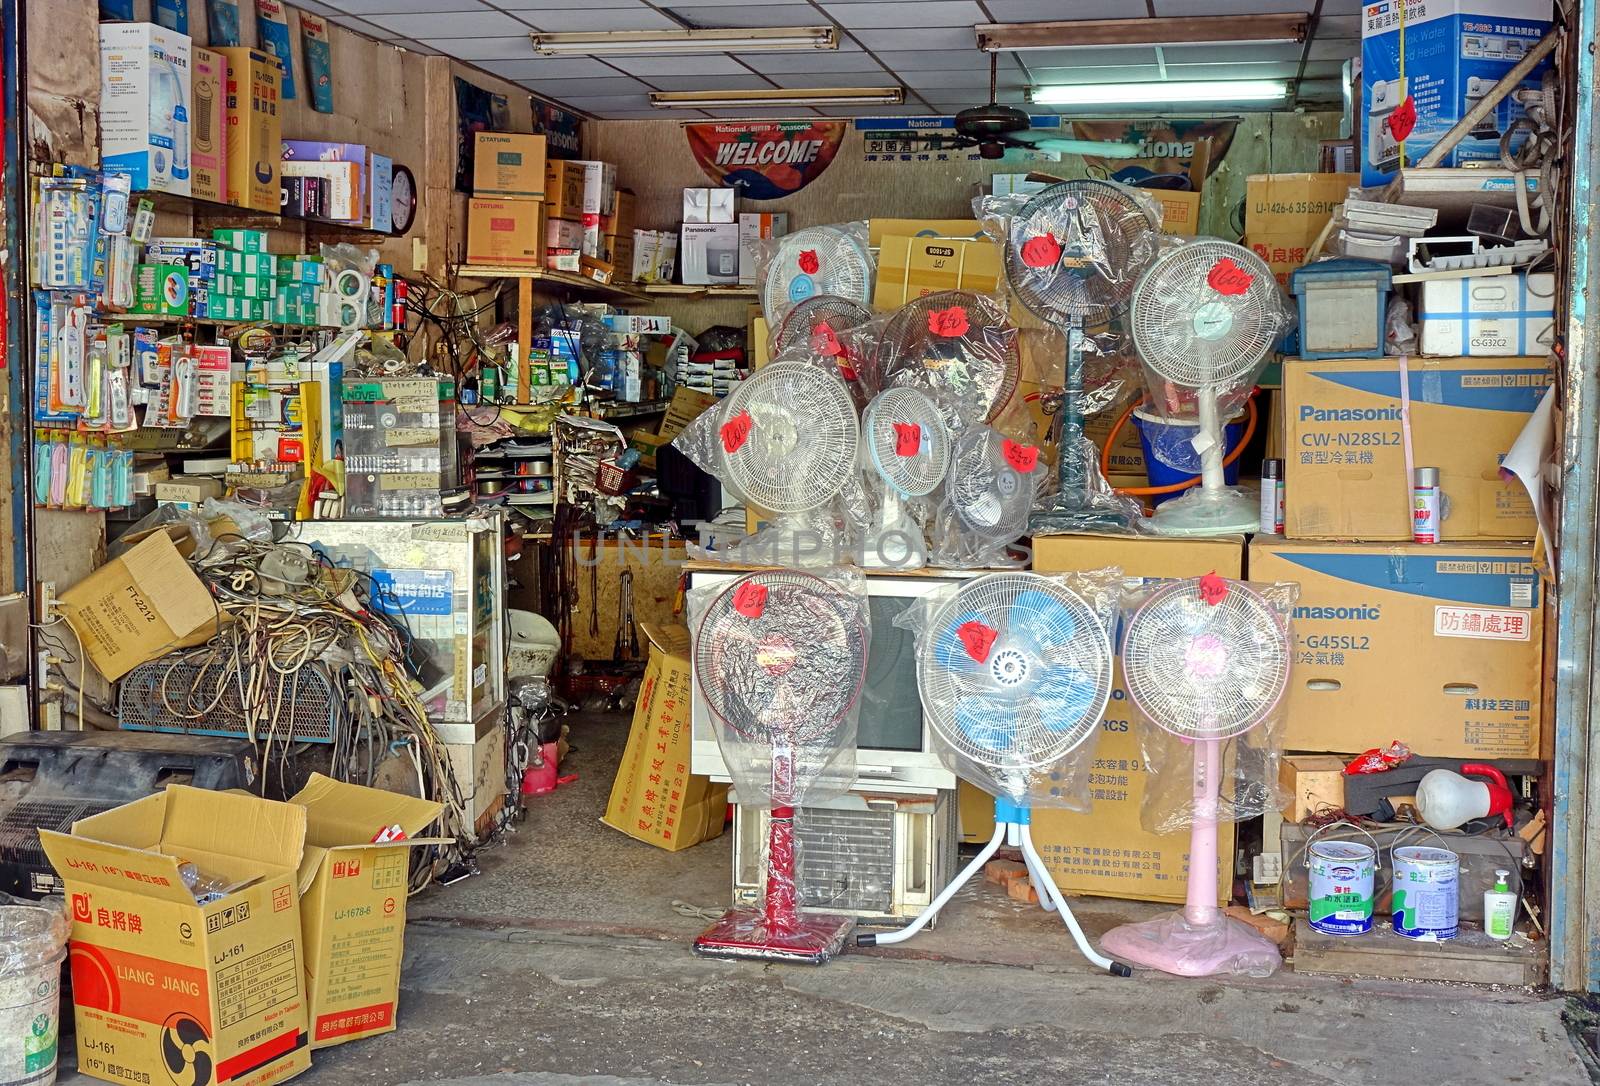 KAOHSIUNG, TAIWAN -- AUGUST 5, 2017: A traditional electric and hardware store on the island of Chijin.